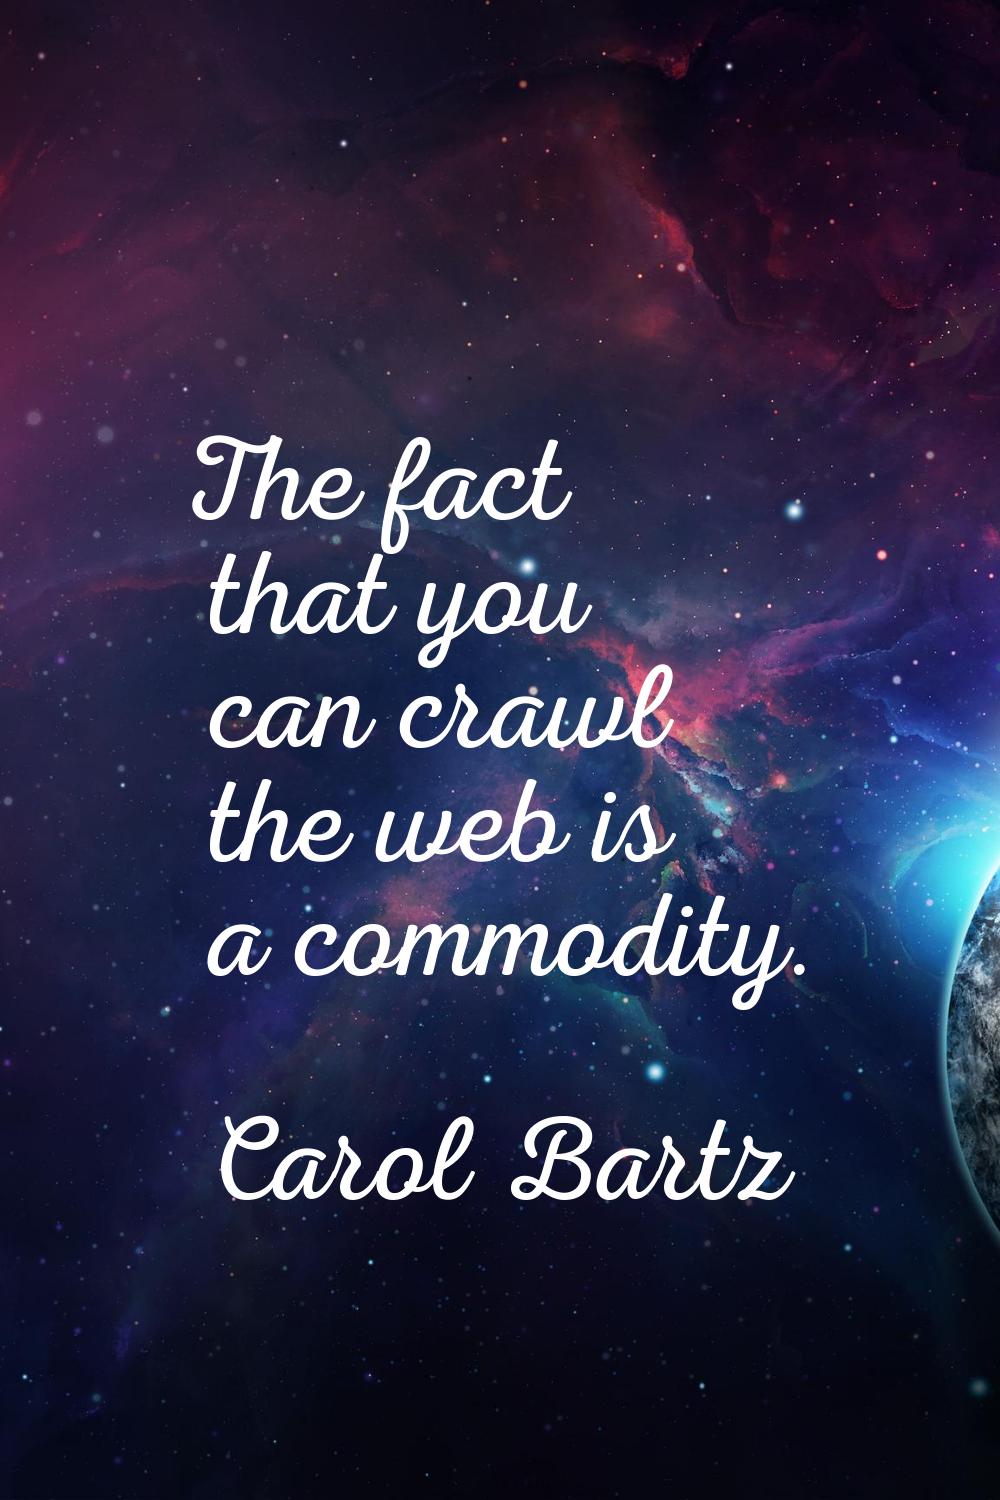 The fact that you can crawl the web is a commodity.